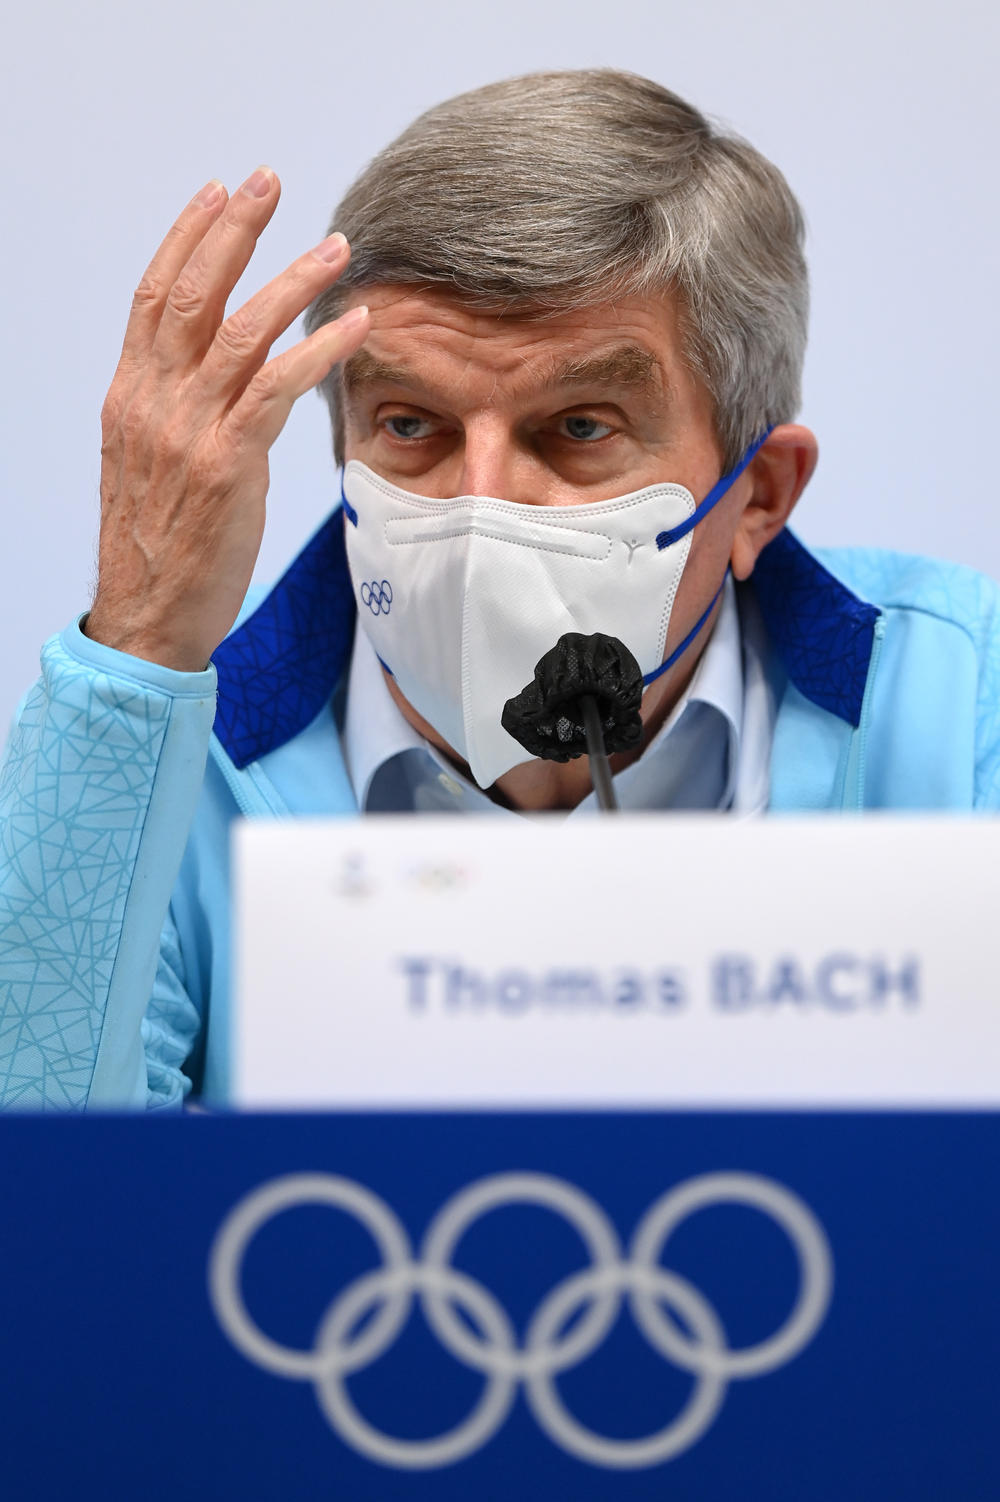 Thomas Bach, the International Olympic Committee president, speaks to the media during his closing press conference of the Games on Friday in Beijing.